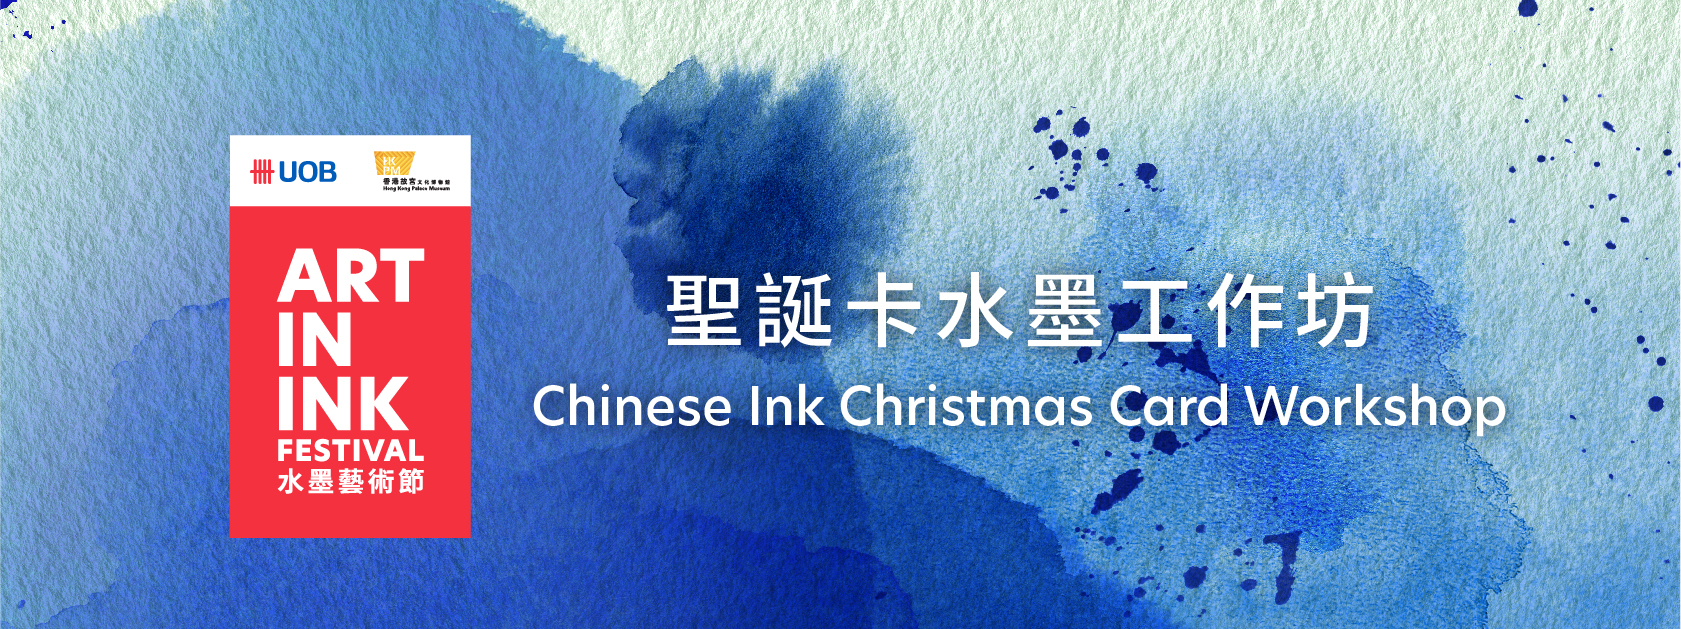 Chinese Ink Christmas Card Workshop